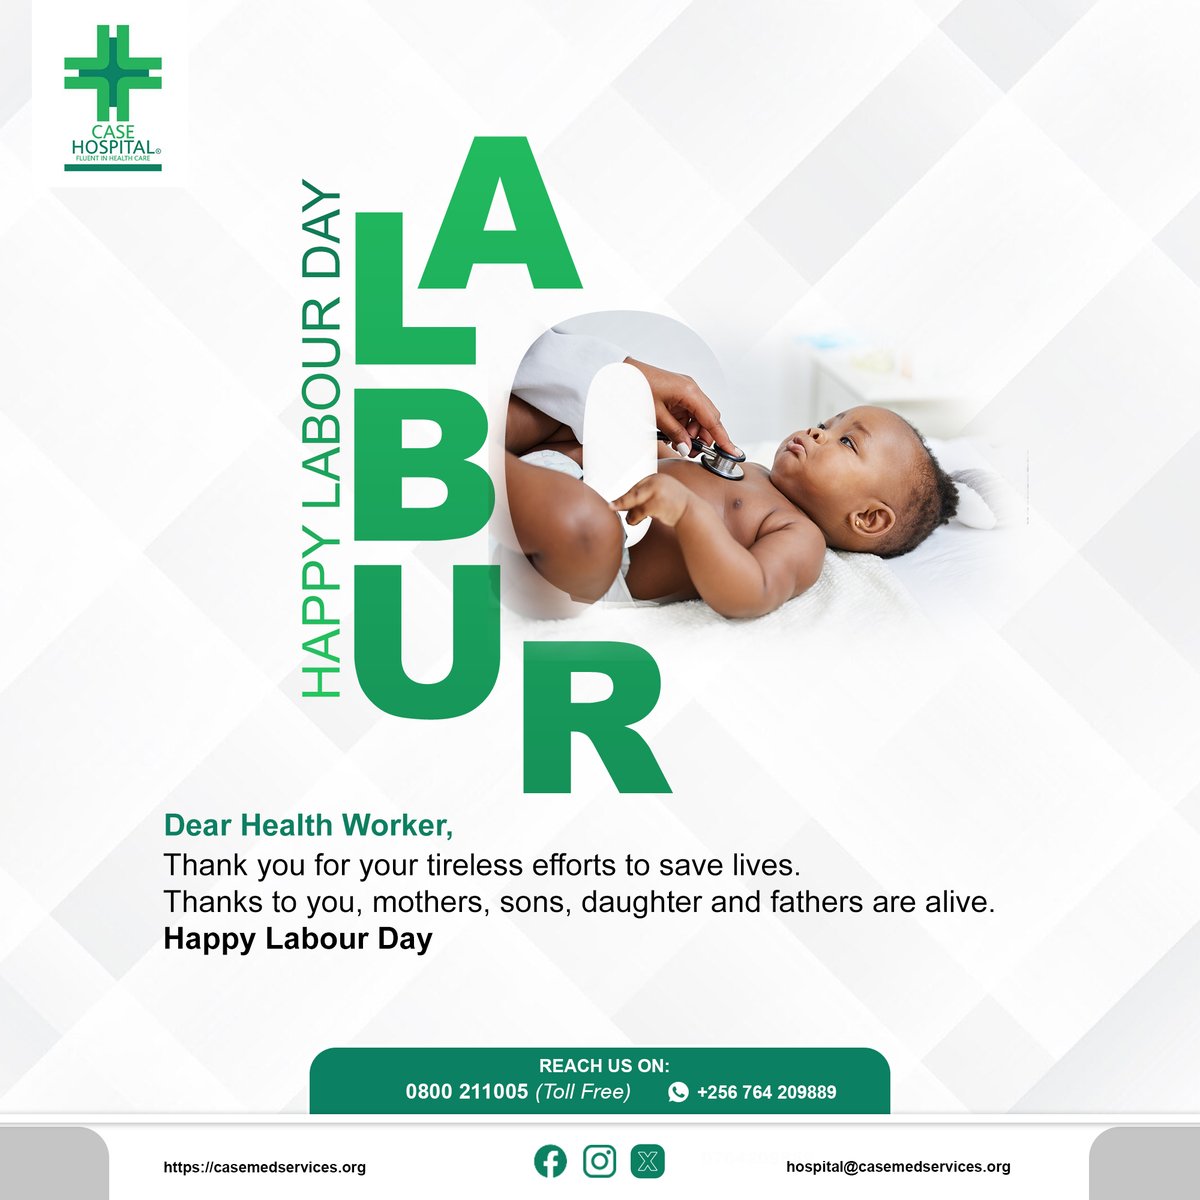 Today, we aim to celebrate all healthcare workers and stakeholders who tirelessly strive to save lives. Working arduous hours and dedicating your time, your efforts are truly valued. Happy Labour Day.

#InternationalLabourDay